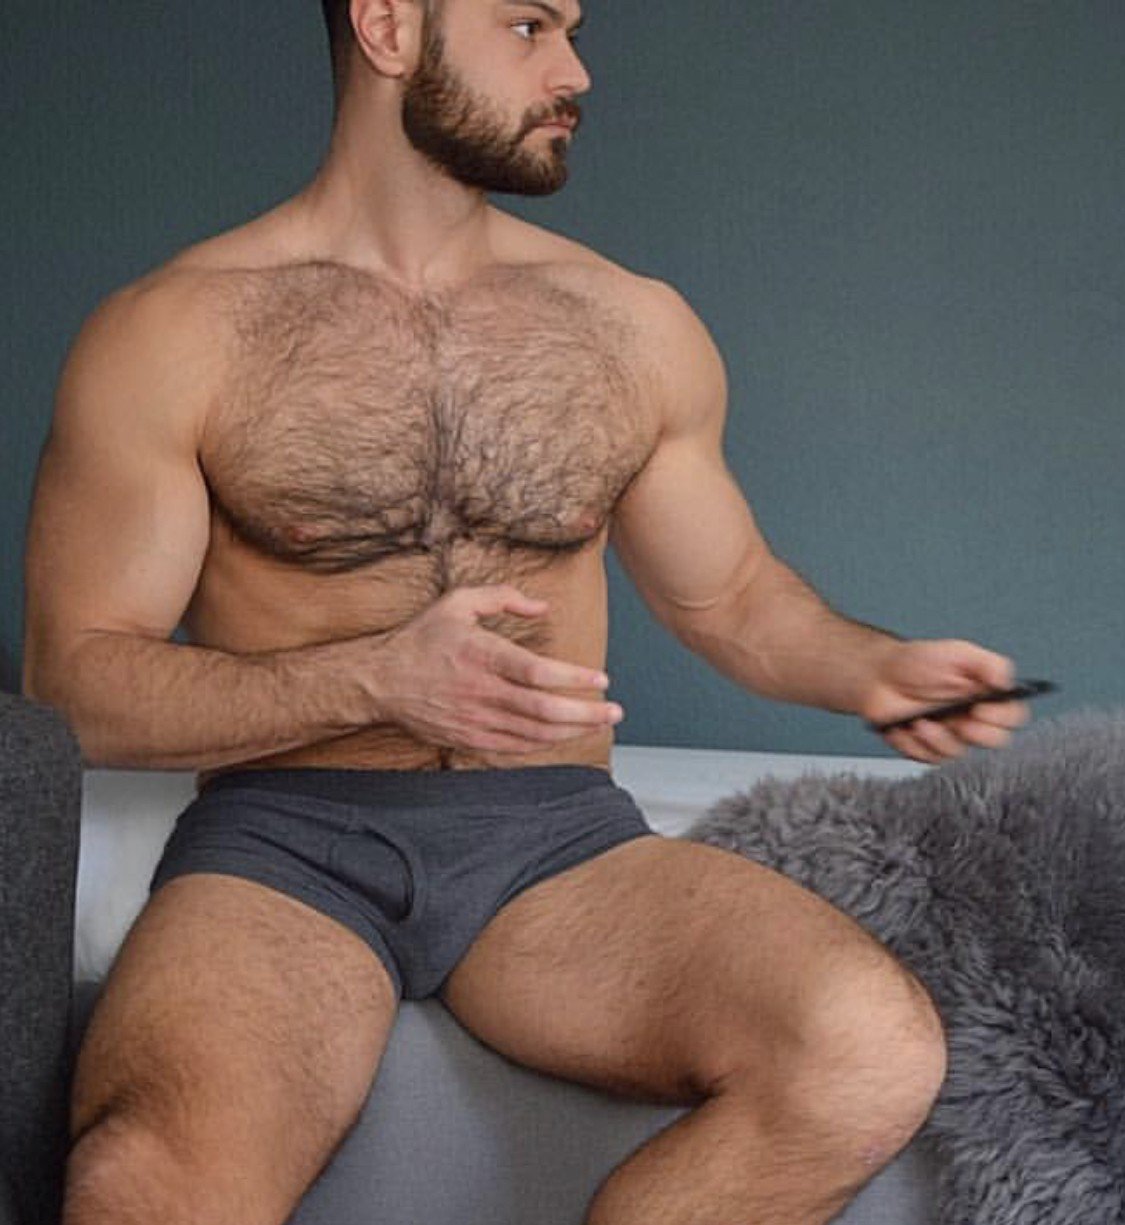 Explore the Post by WantSomeDaddies with the username @WantSomeDaddies, posted on April 18, 2019. The post is about the topic Gay. and the text says 'What a beautiful man!'